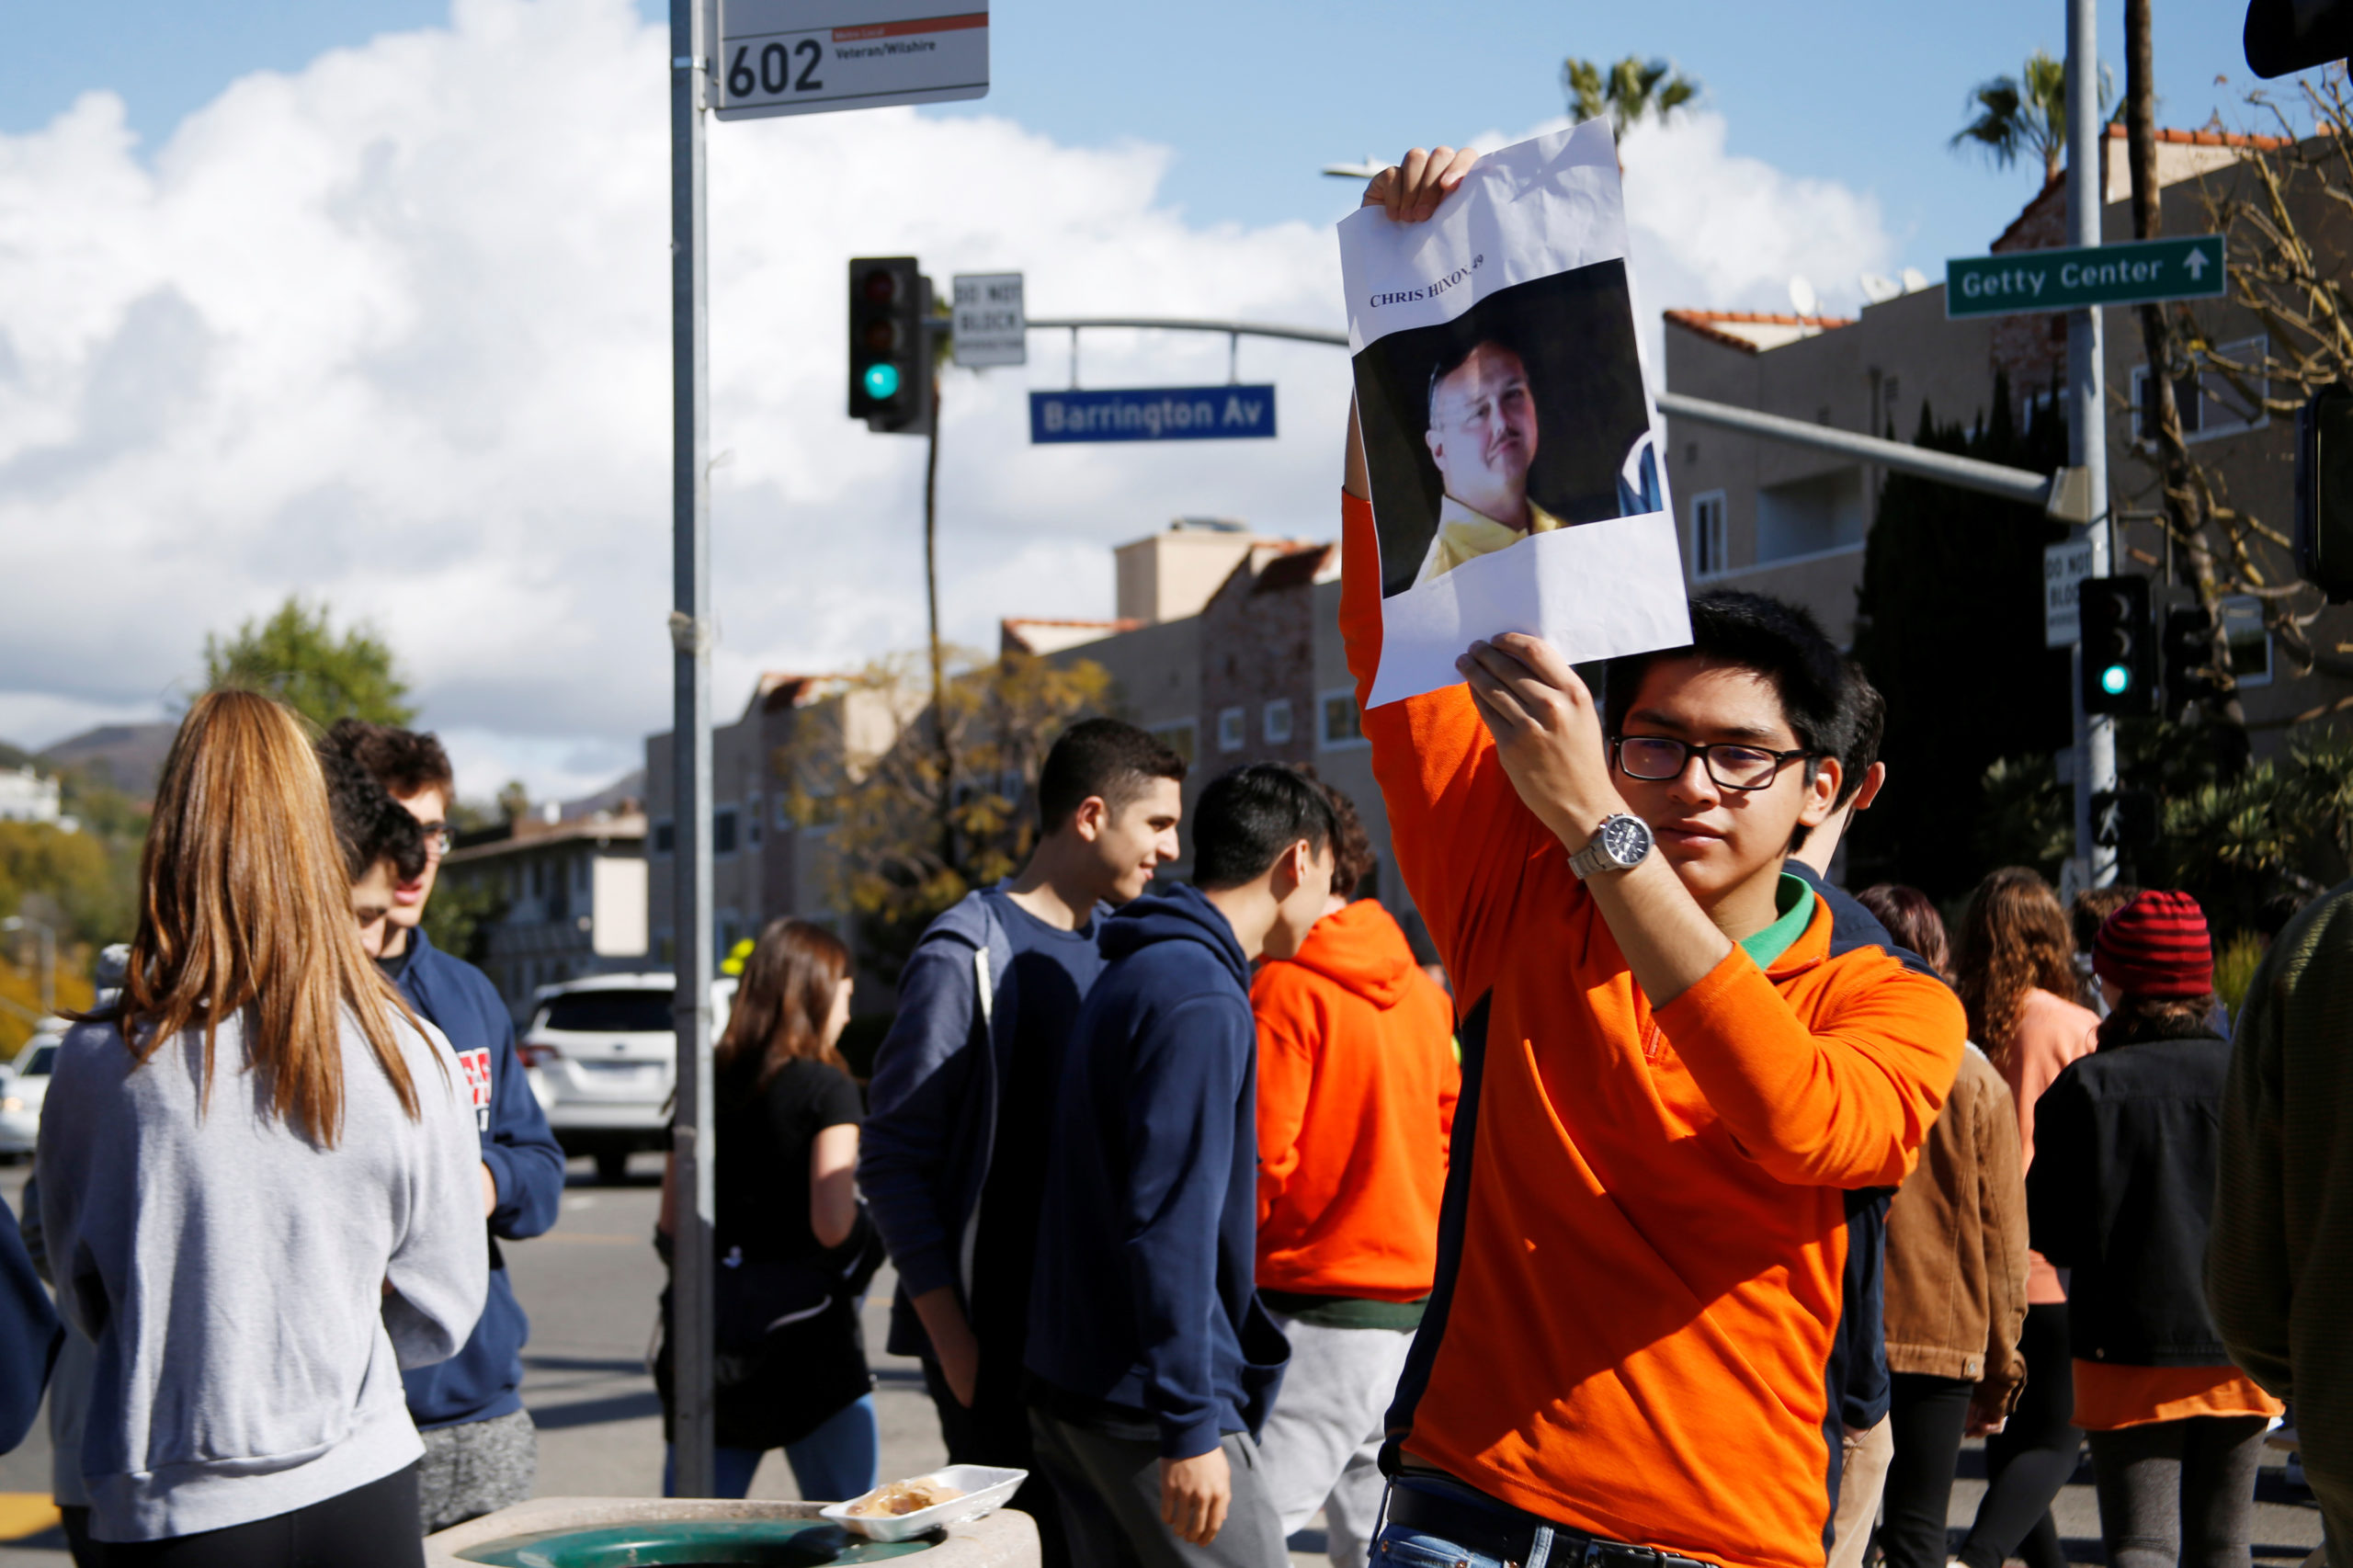 Brentwood School Los Angeles students march out of their campus in solidarity with students across the country for the National School Walkout in Los Angeles, California March 14, 2018. Danny Moloshok, Brentwood School Los Angeles/Handout via REUTERS ATTENTION EDITORS - THIS IMAGE WAS PROVIDED BY A THIRD PARTY.